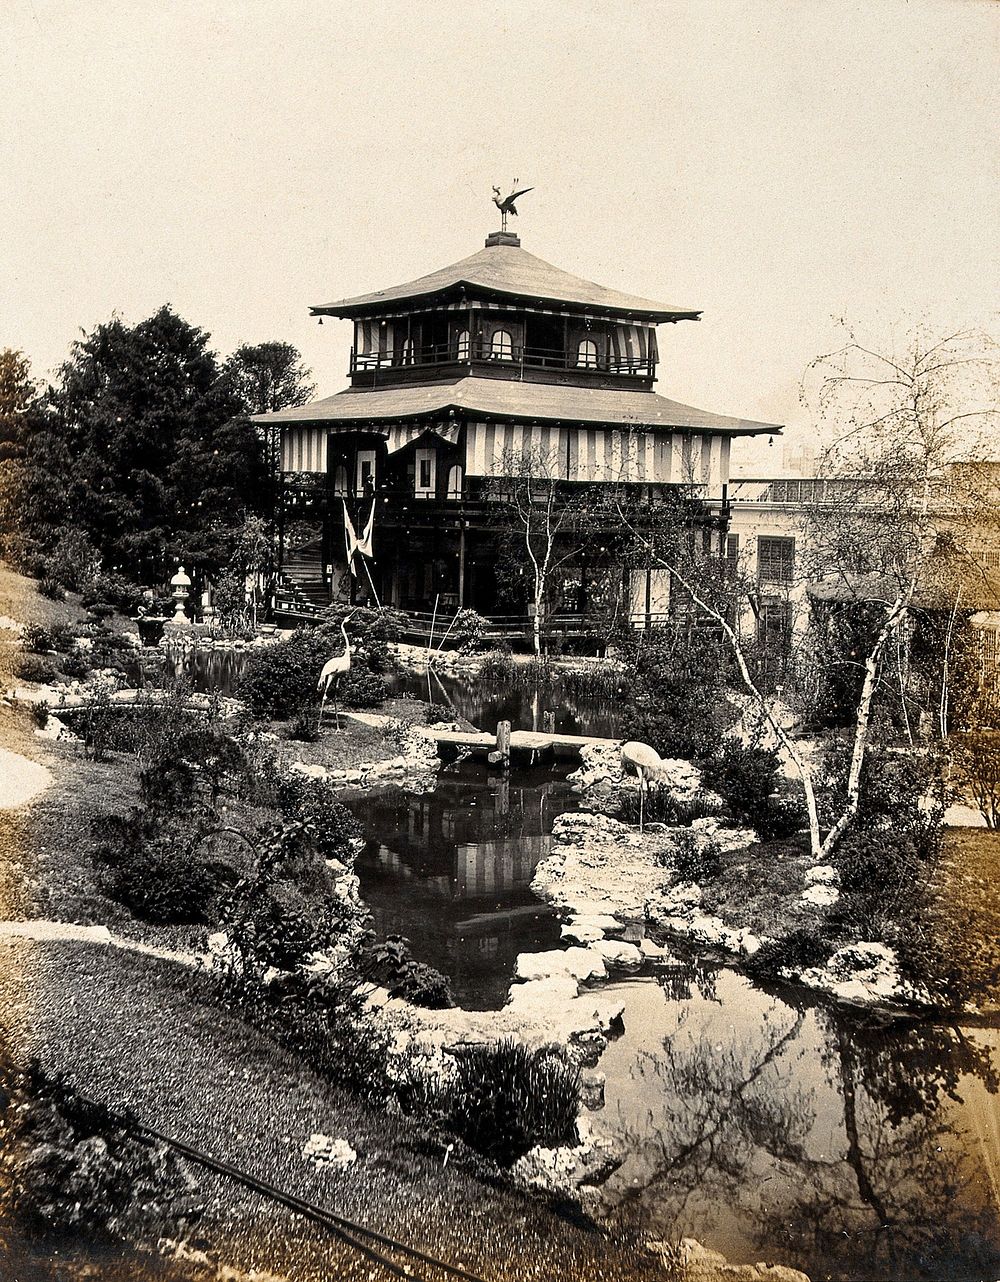 The 1904 World's Fair, St. Louis, Missouri: a Japanese exhibit: the Enchanted Garden and a traditional Japanese house.…